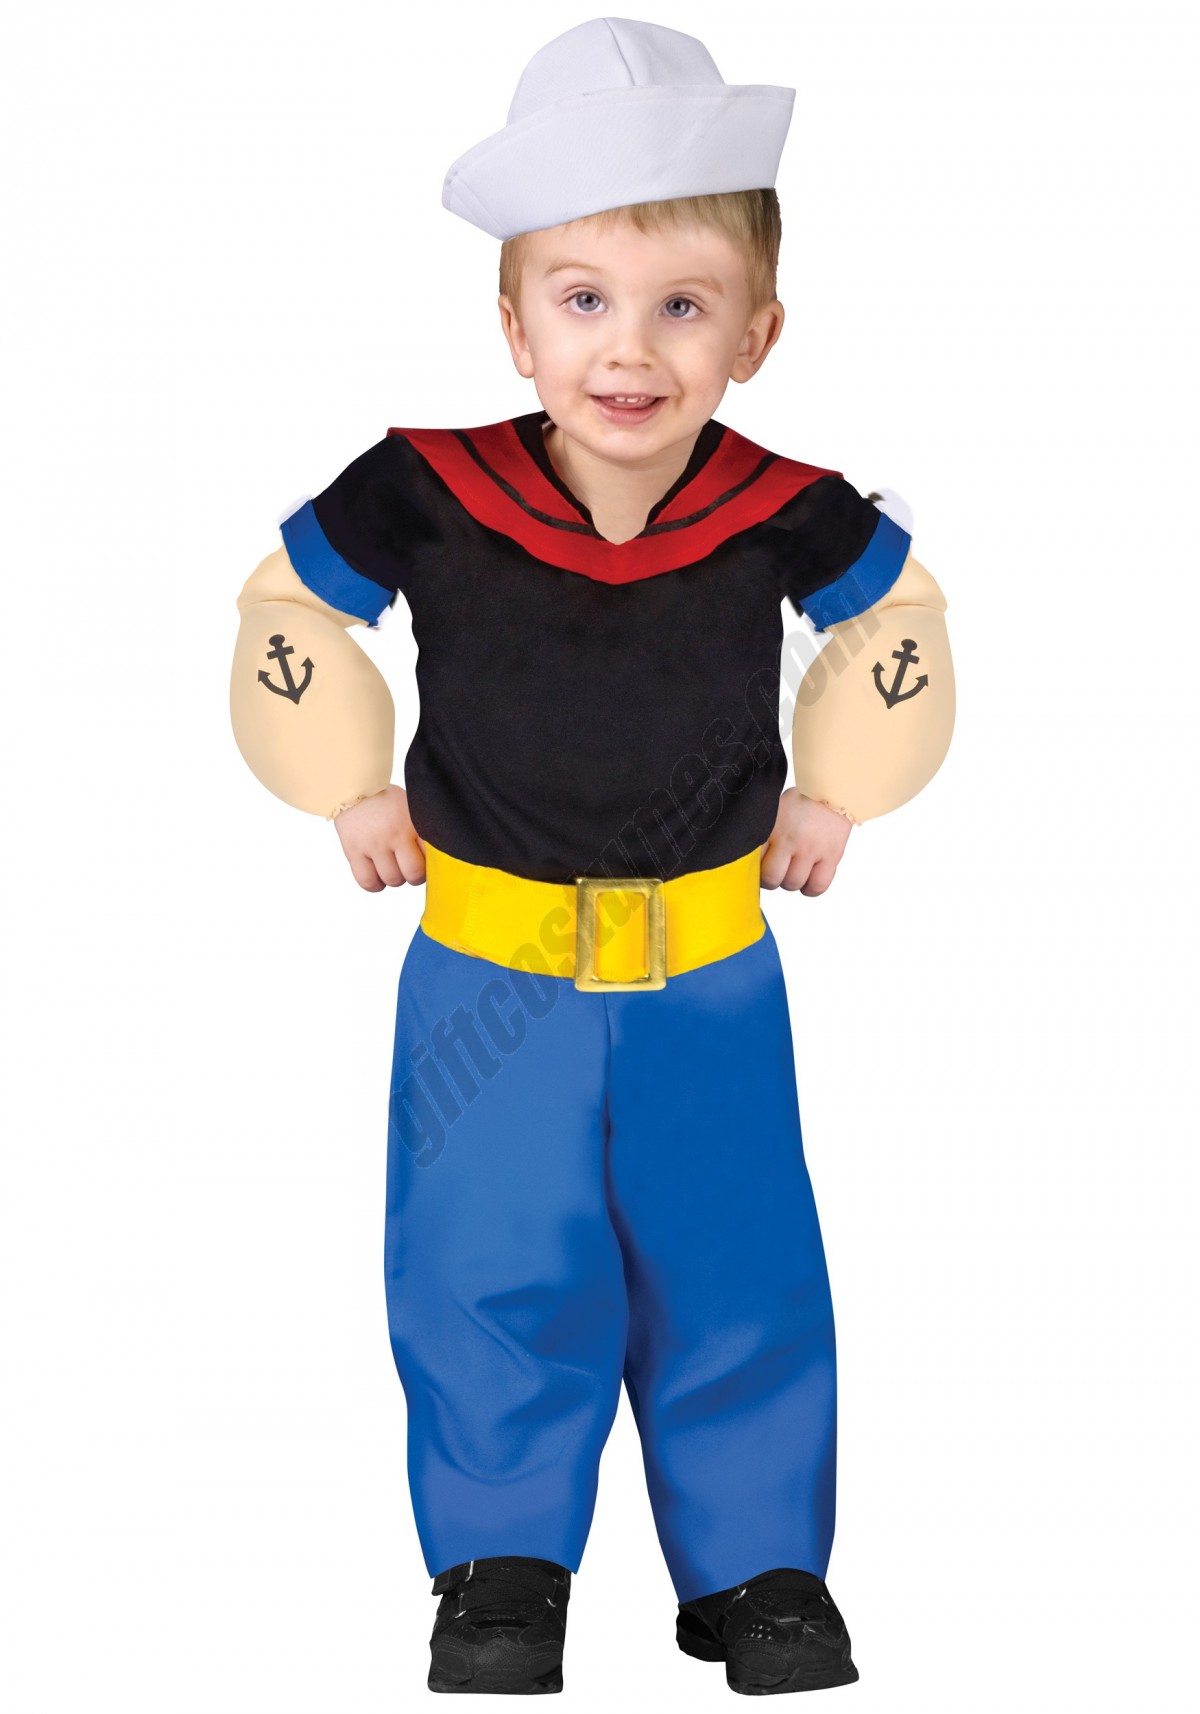 Popeye Costume for Toddlers Promotions - -0